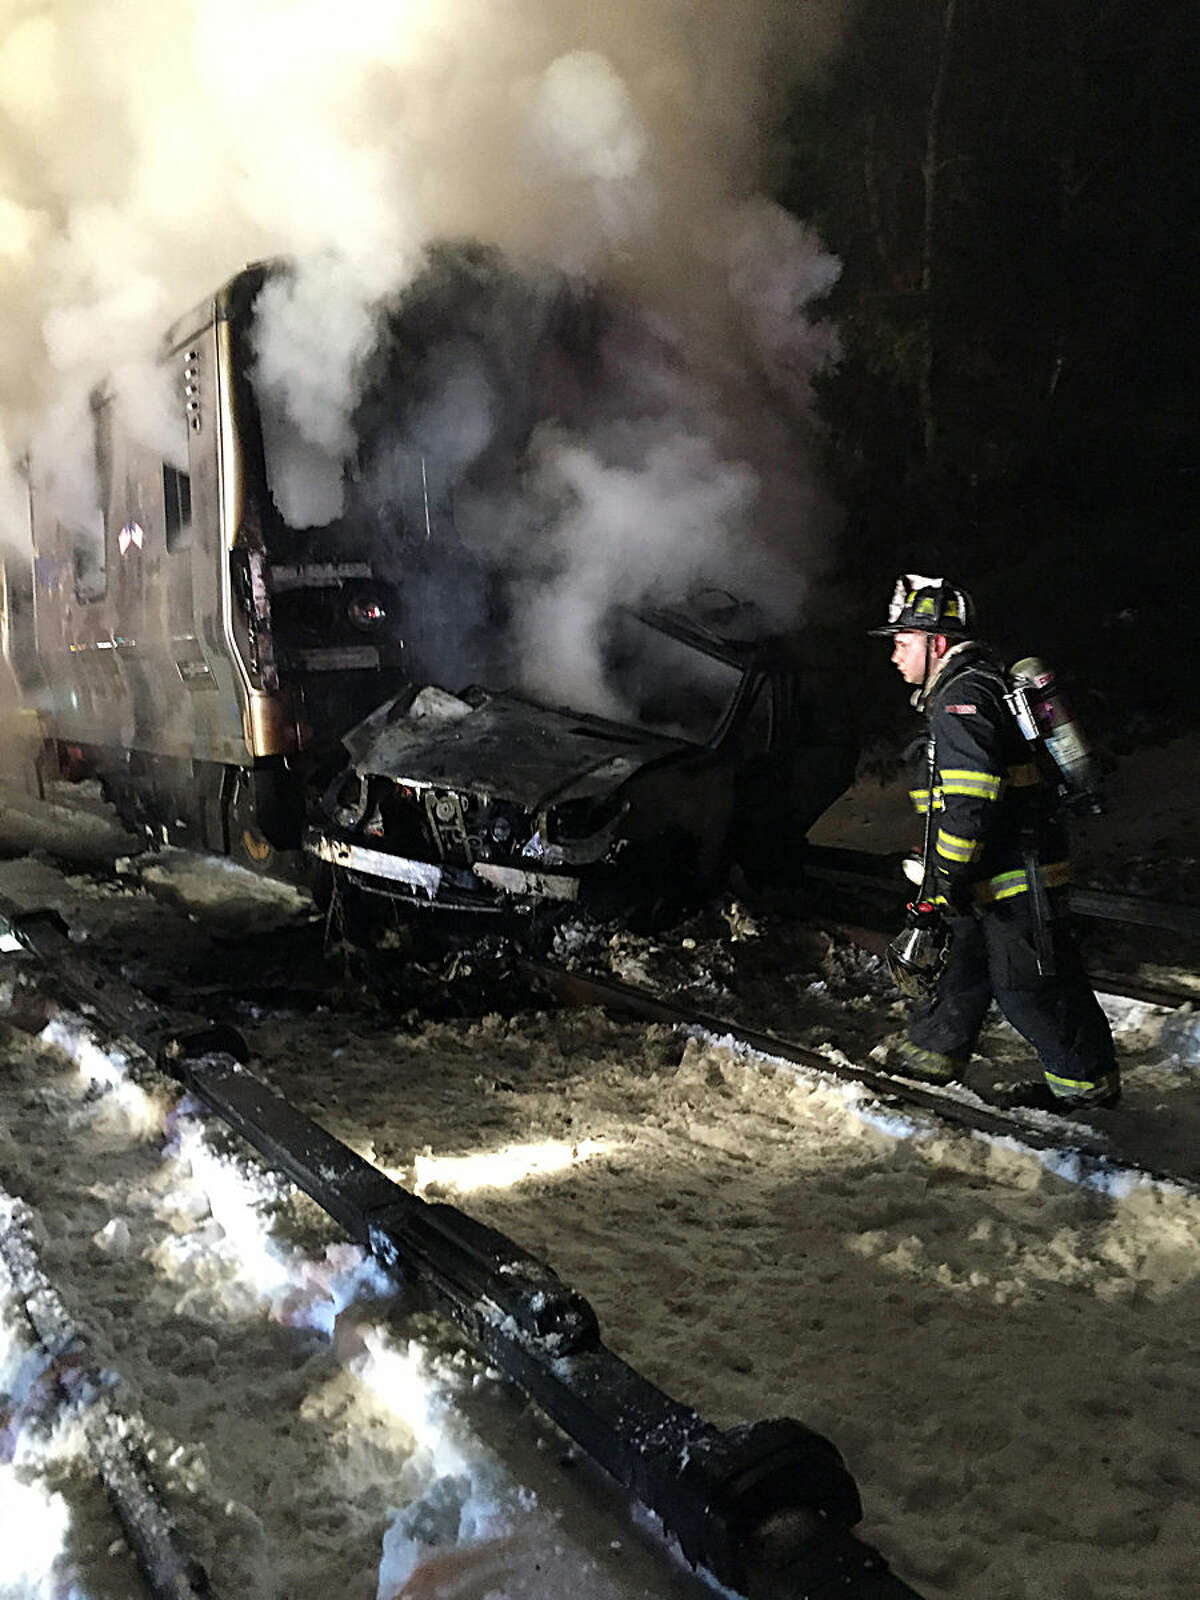 A firefighter walks past the burning wreckage of a Metro-North Railroad passenger train and a vehicle in Valhalla, N.Y., Tuesday, Feb. 3, 2015. Metro-North Railroad spokesman Aaron Donovan says the train struck a vehicle at a railroad crossing about 20 miles north of New York City. (AP Photo/The Journal News, Albert Conte)